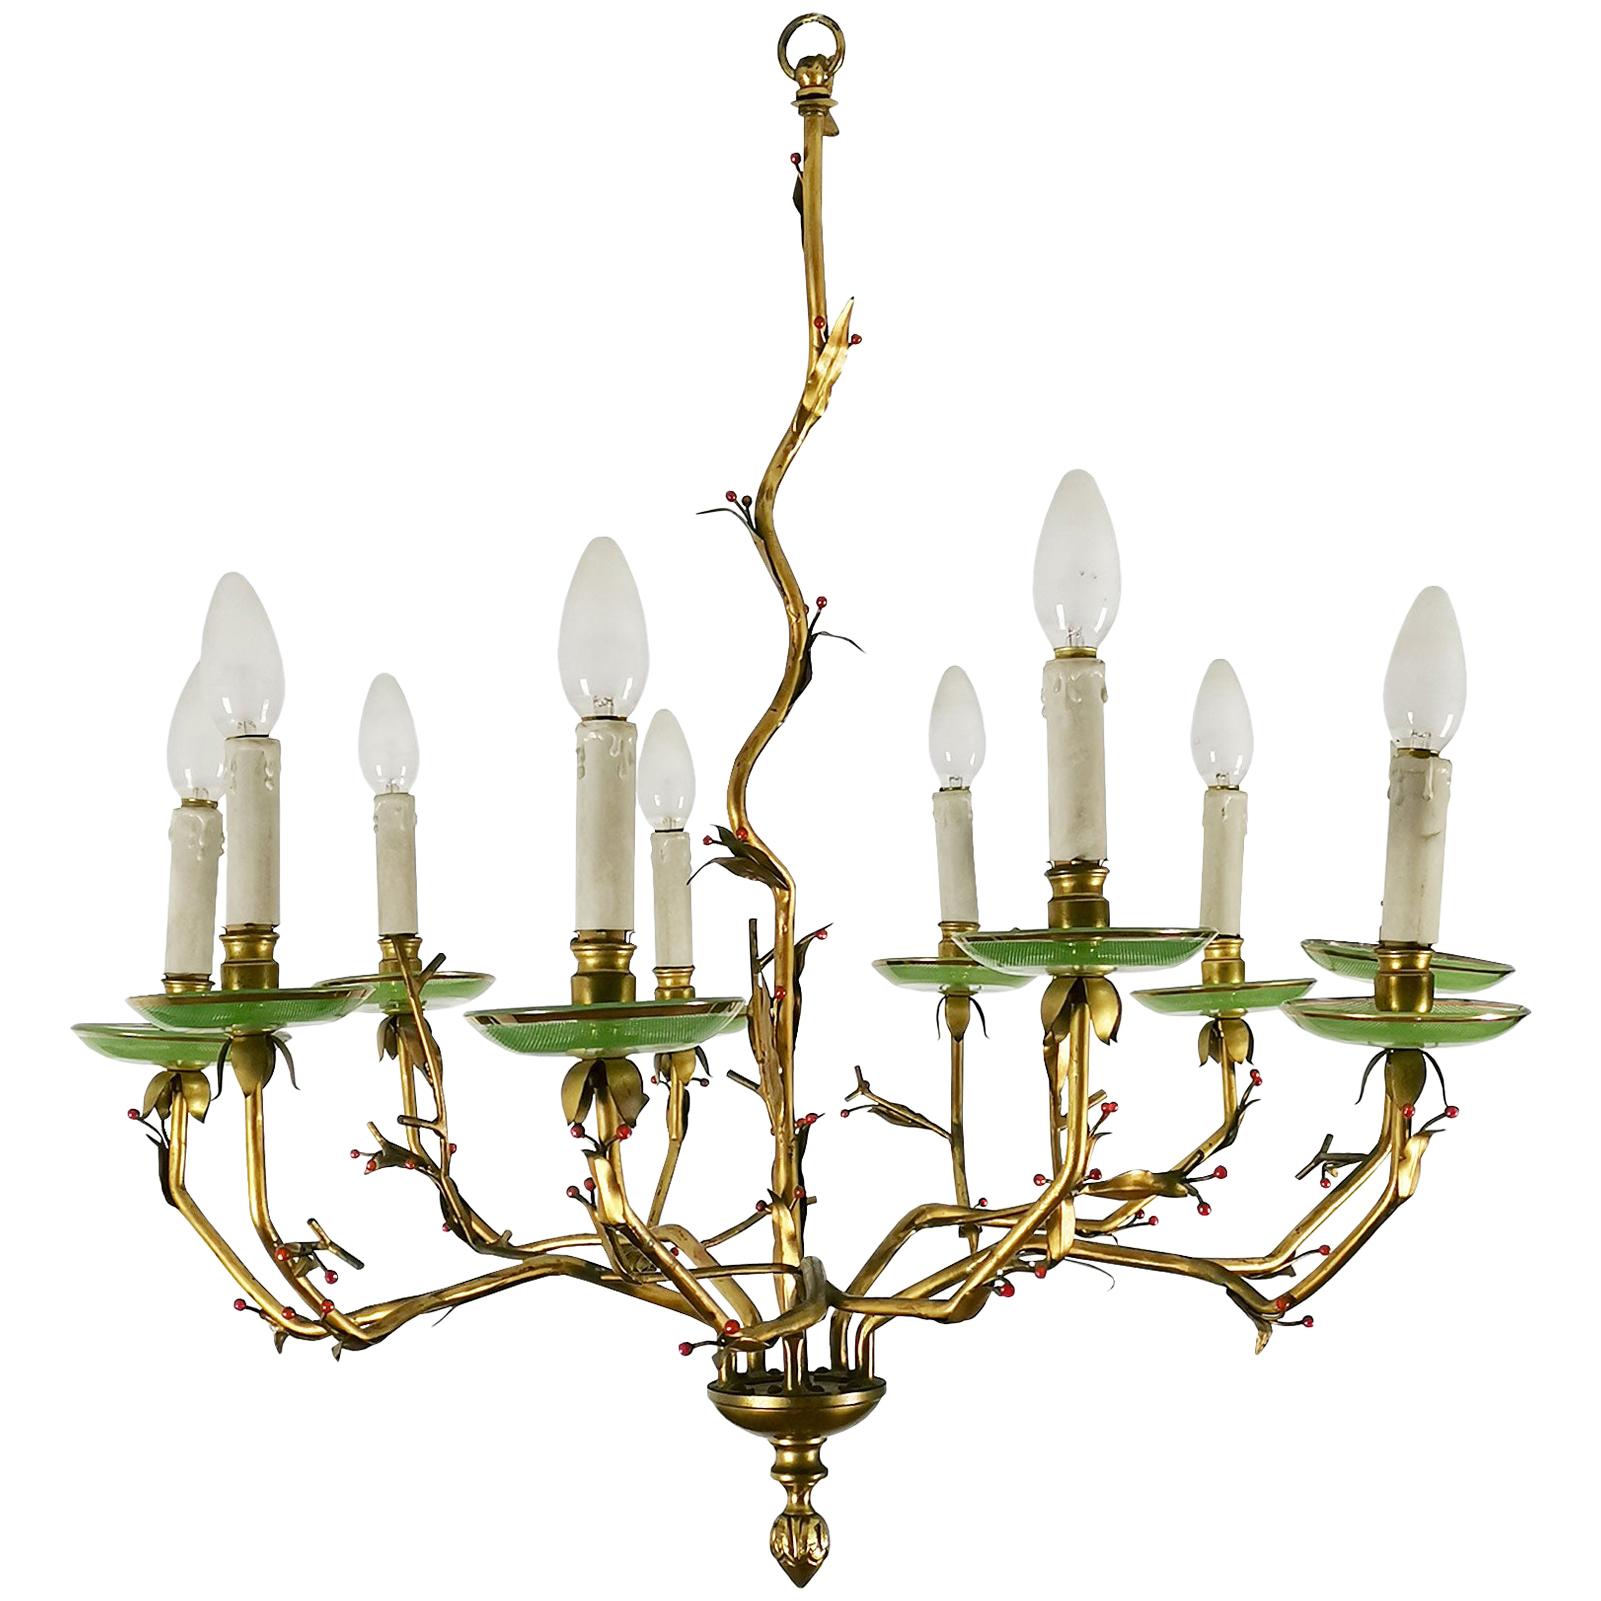 1950s Chandelier with Ten Branches, Golden Bronze and Engraved Glass, Spain